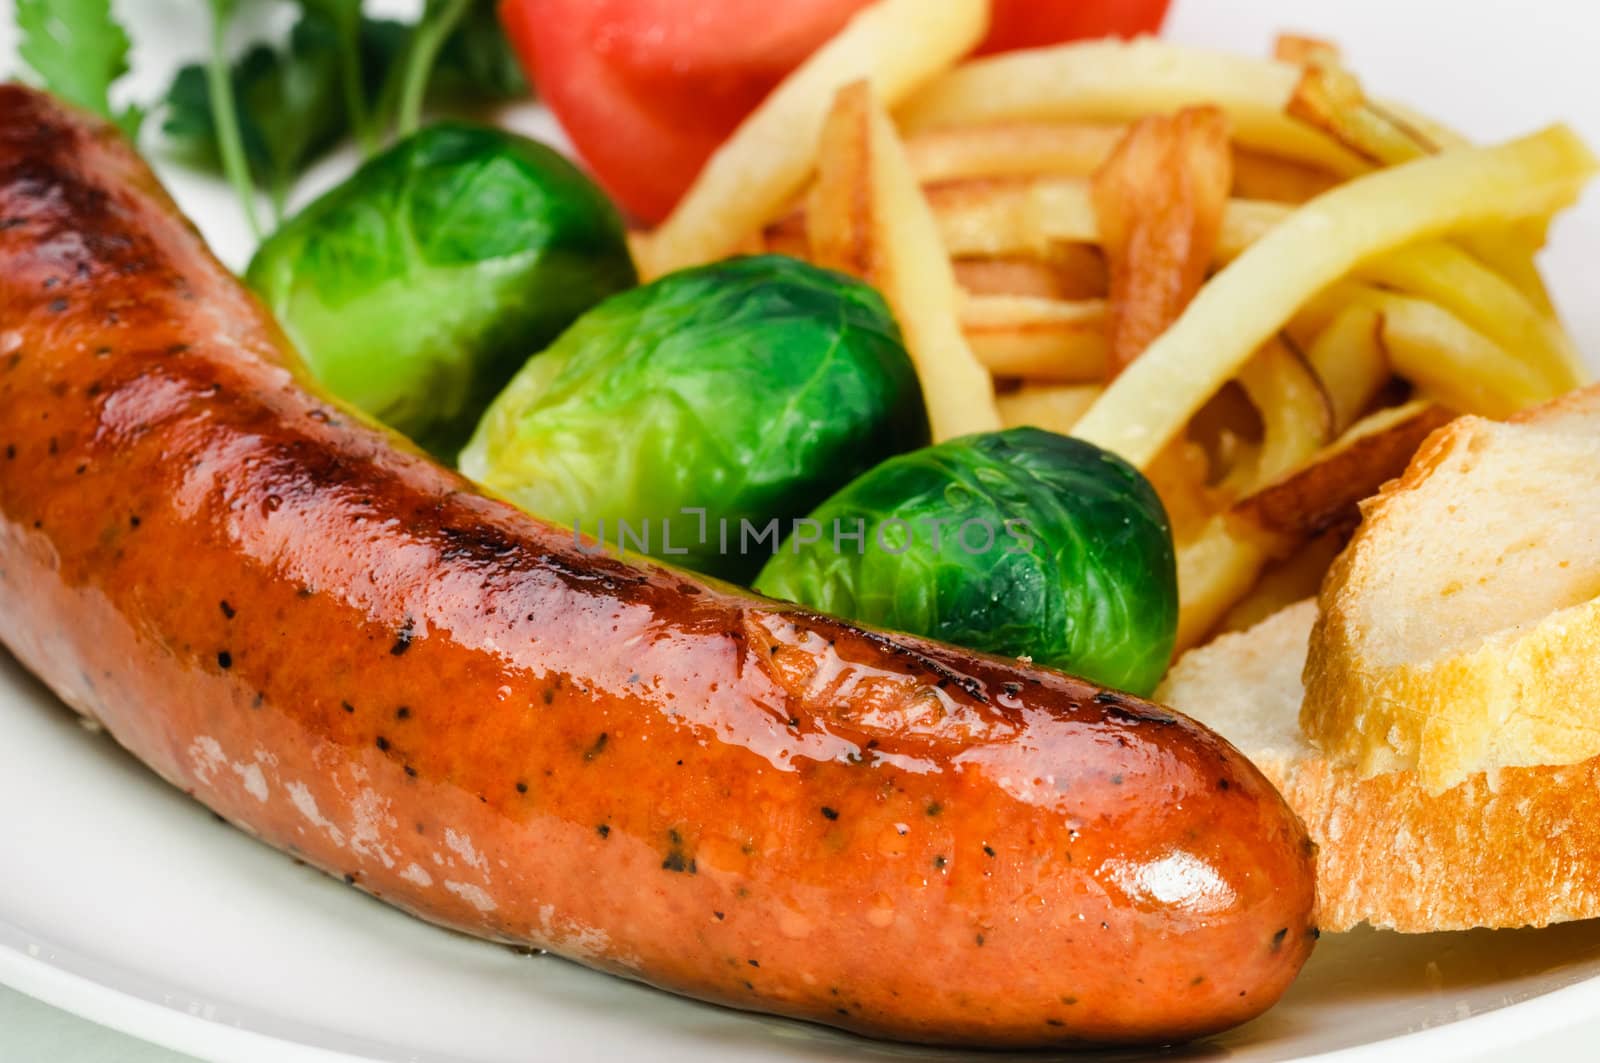 German sausage with potatoes and vegetables. by lobzik